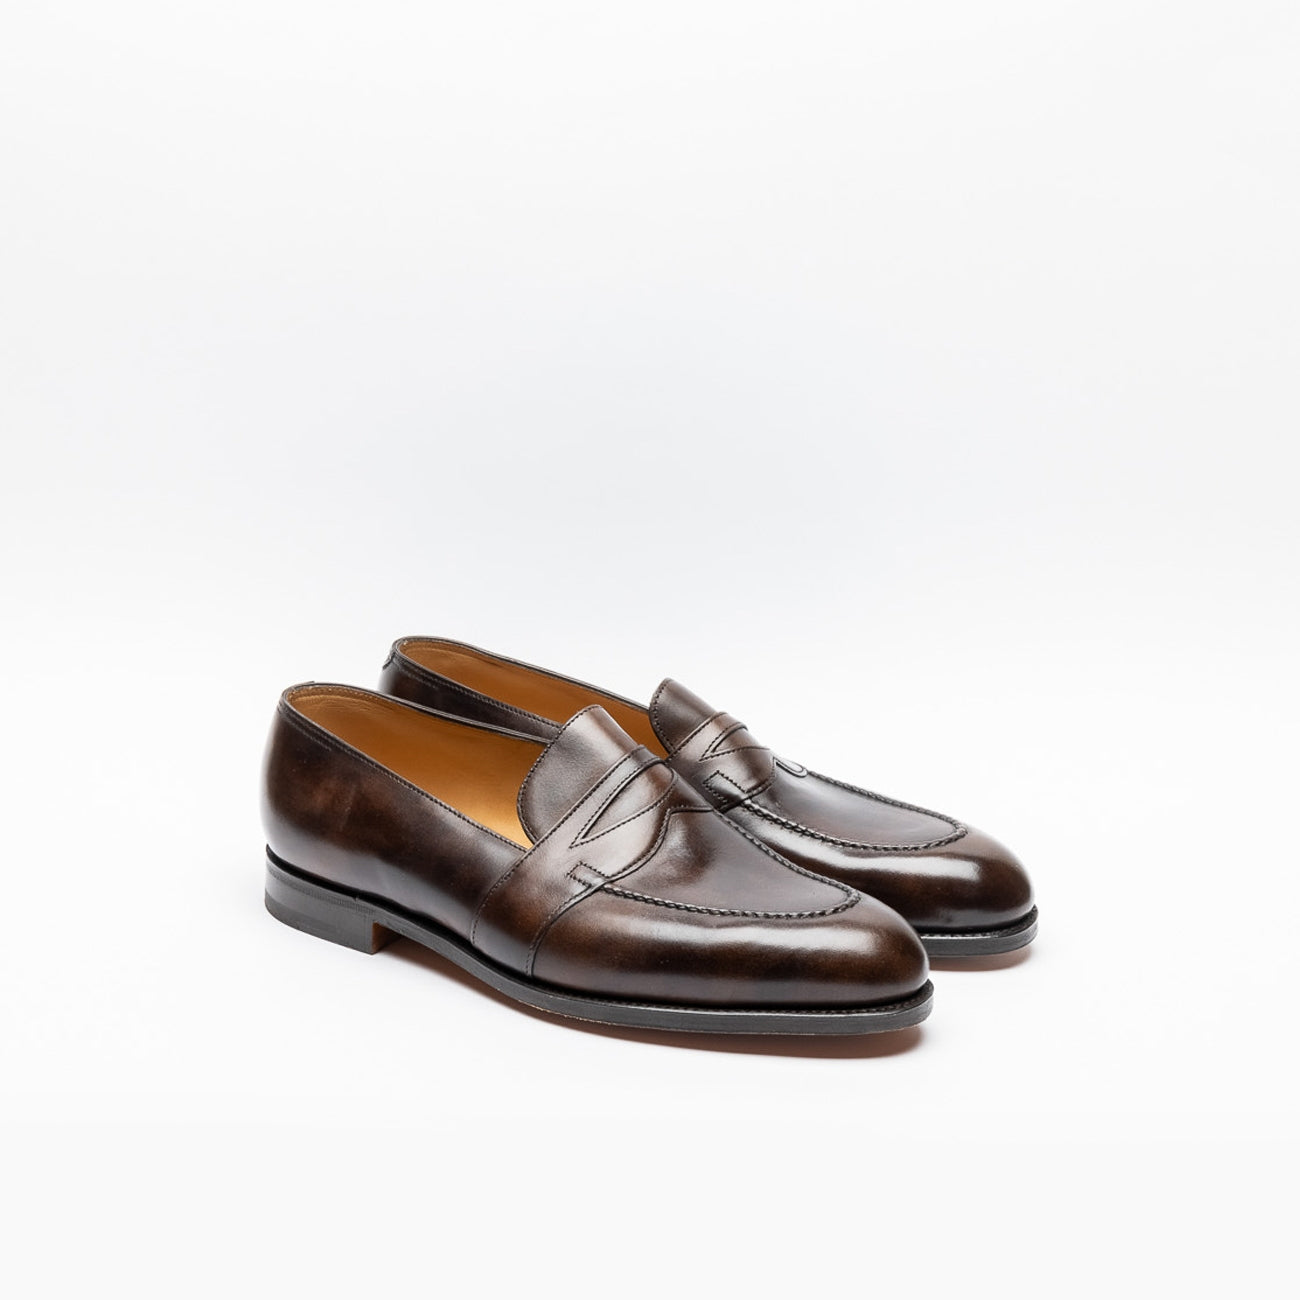 John Lobb Fencote penny loafer moccasin in brown leather